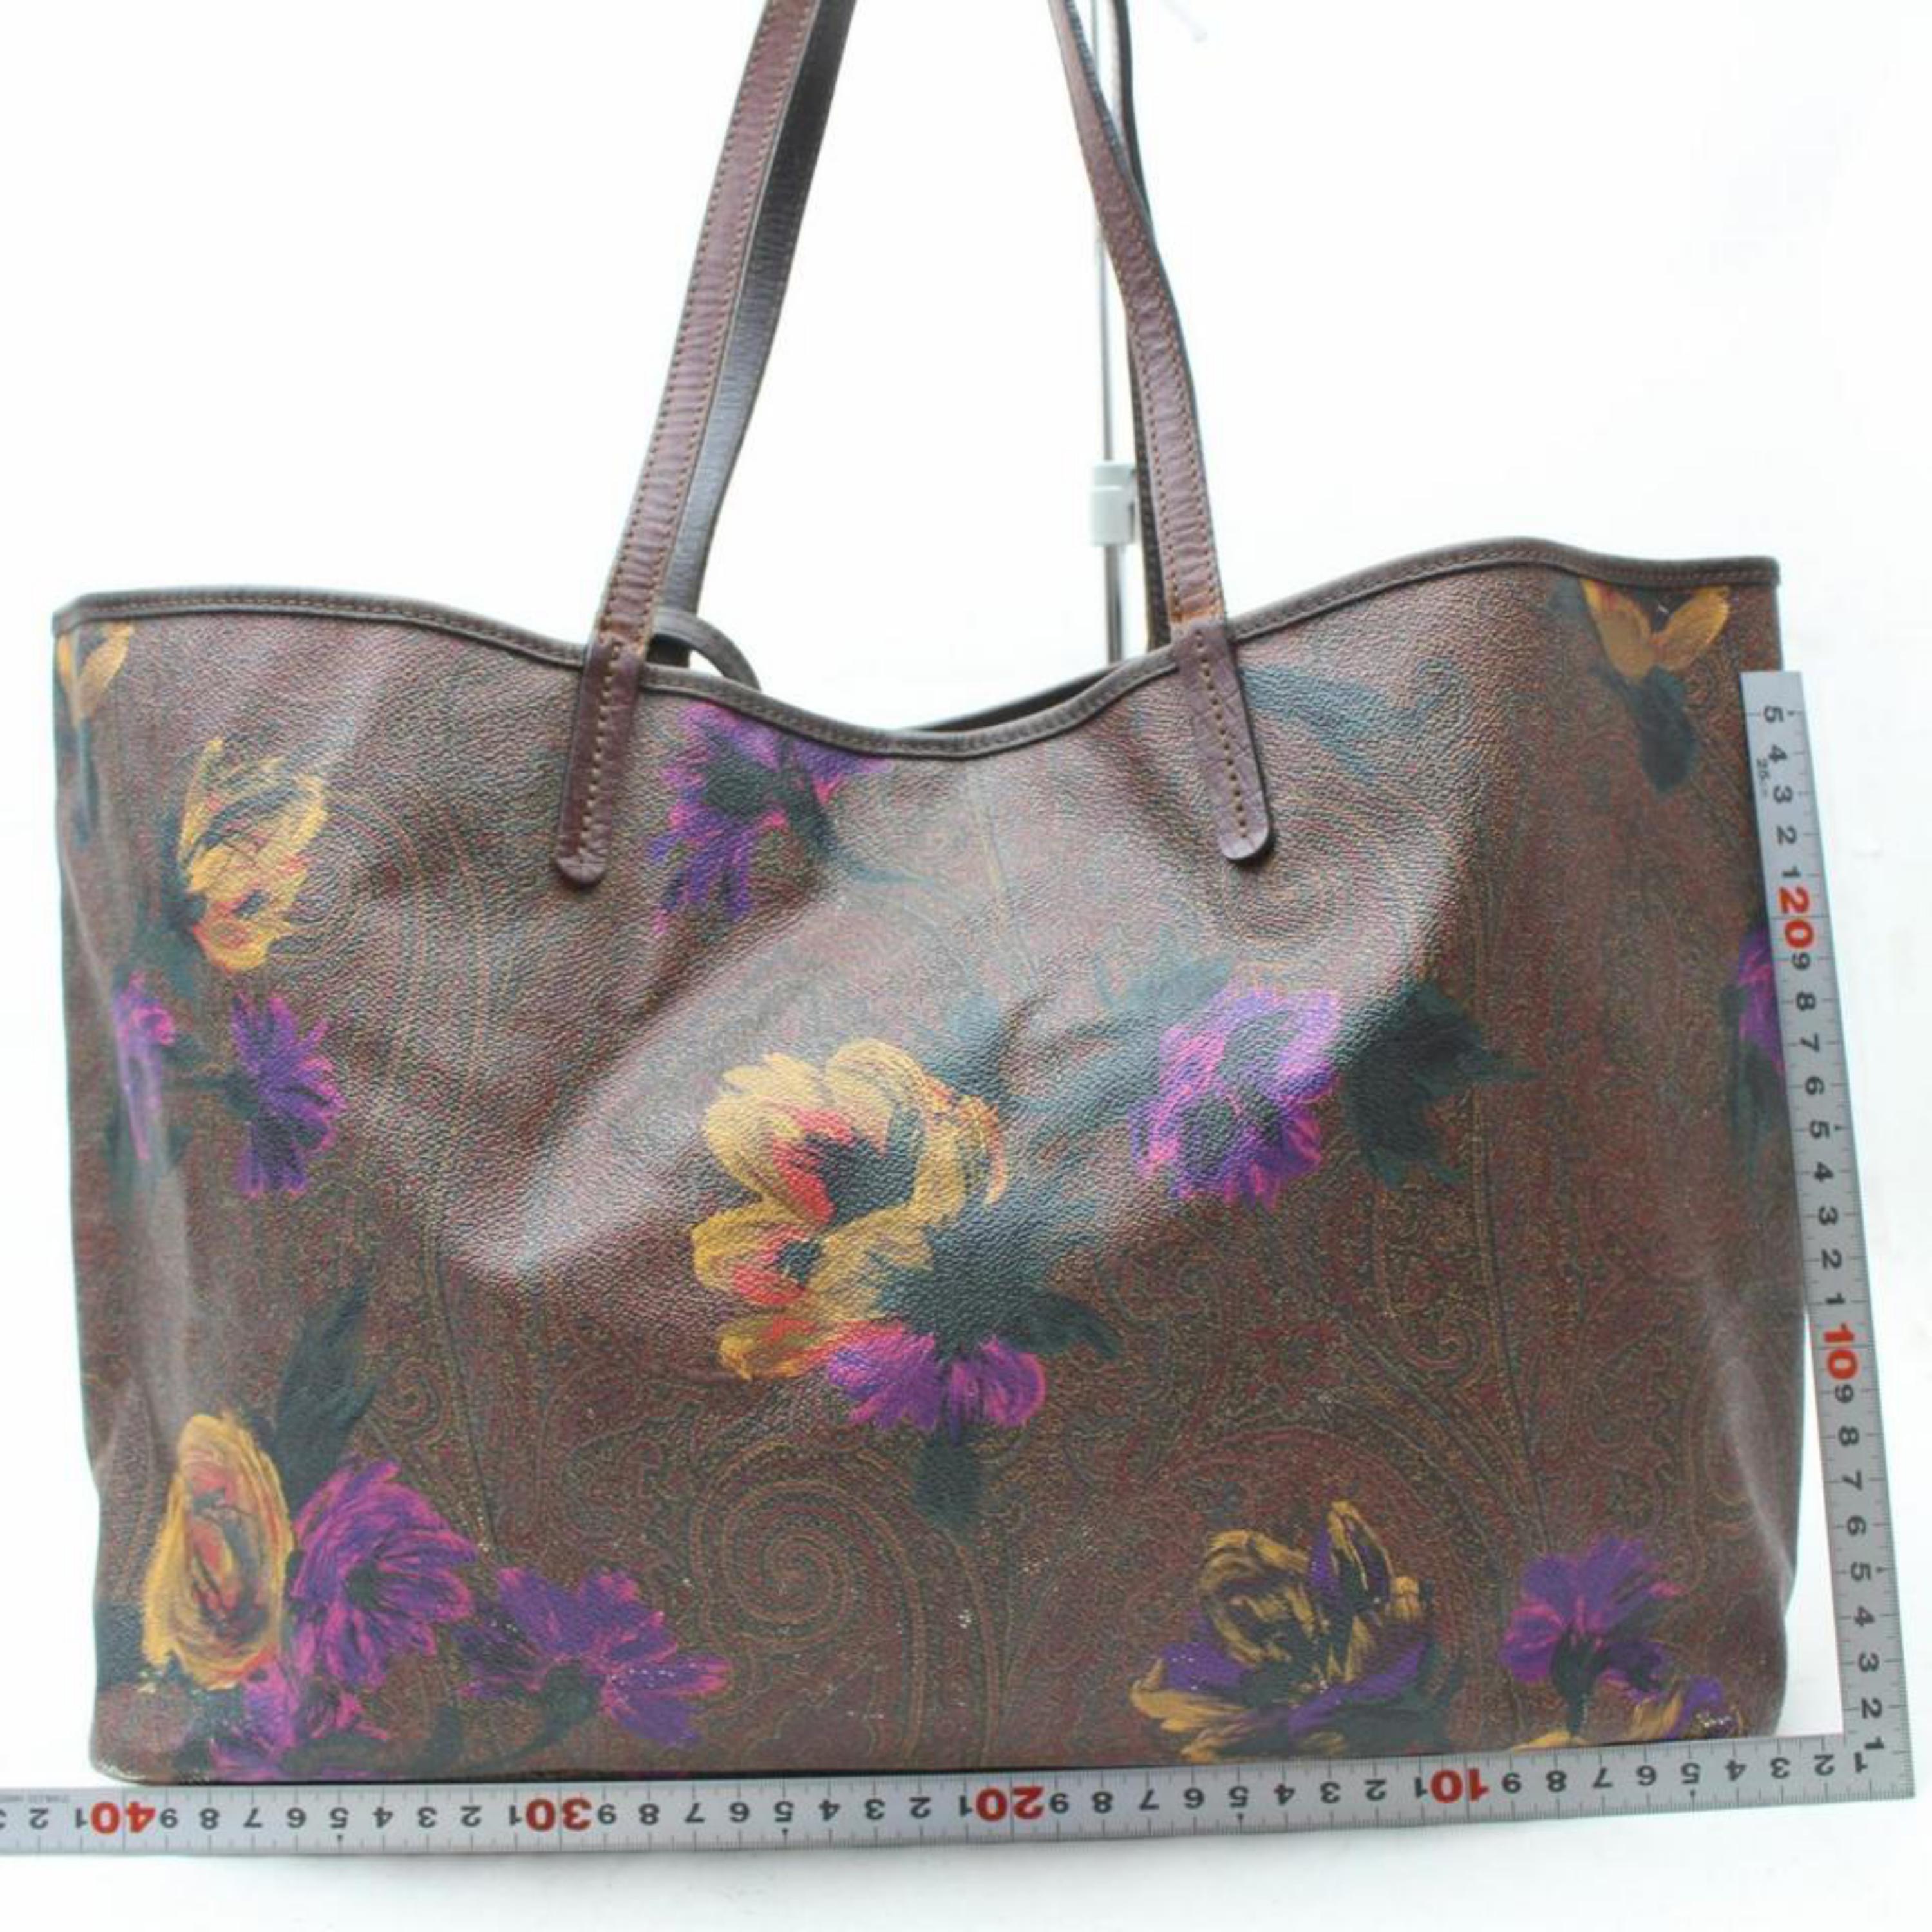 Women's Etro Bordeaux Floral Paisley Tote with Pouch 869601 Burgundy Coated Shoulder Bag For Sale